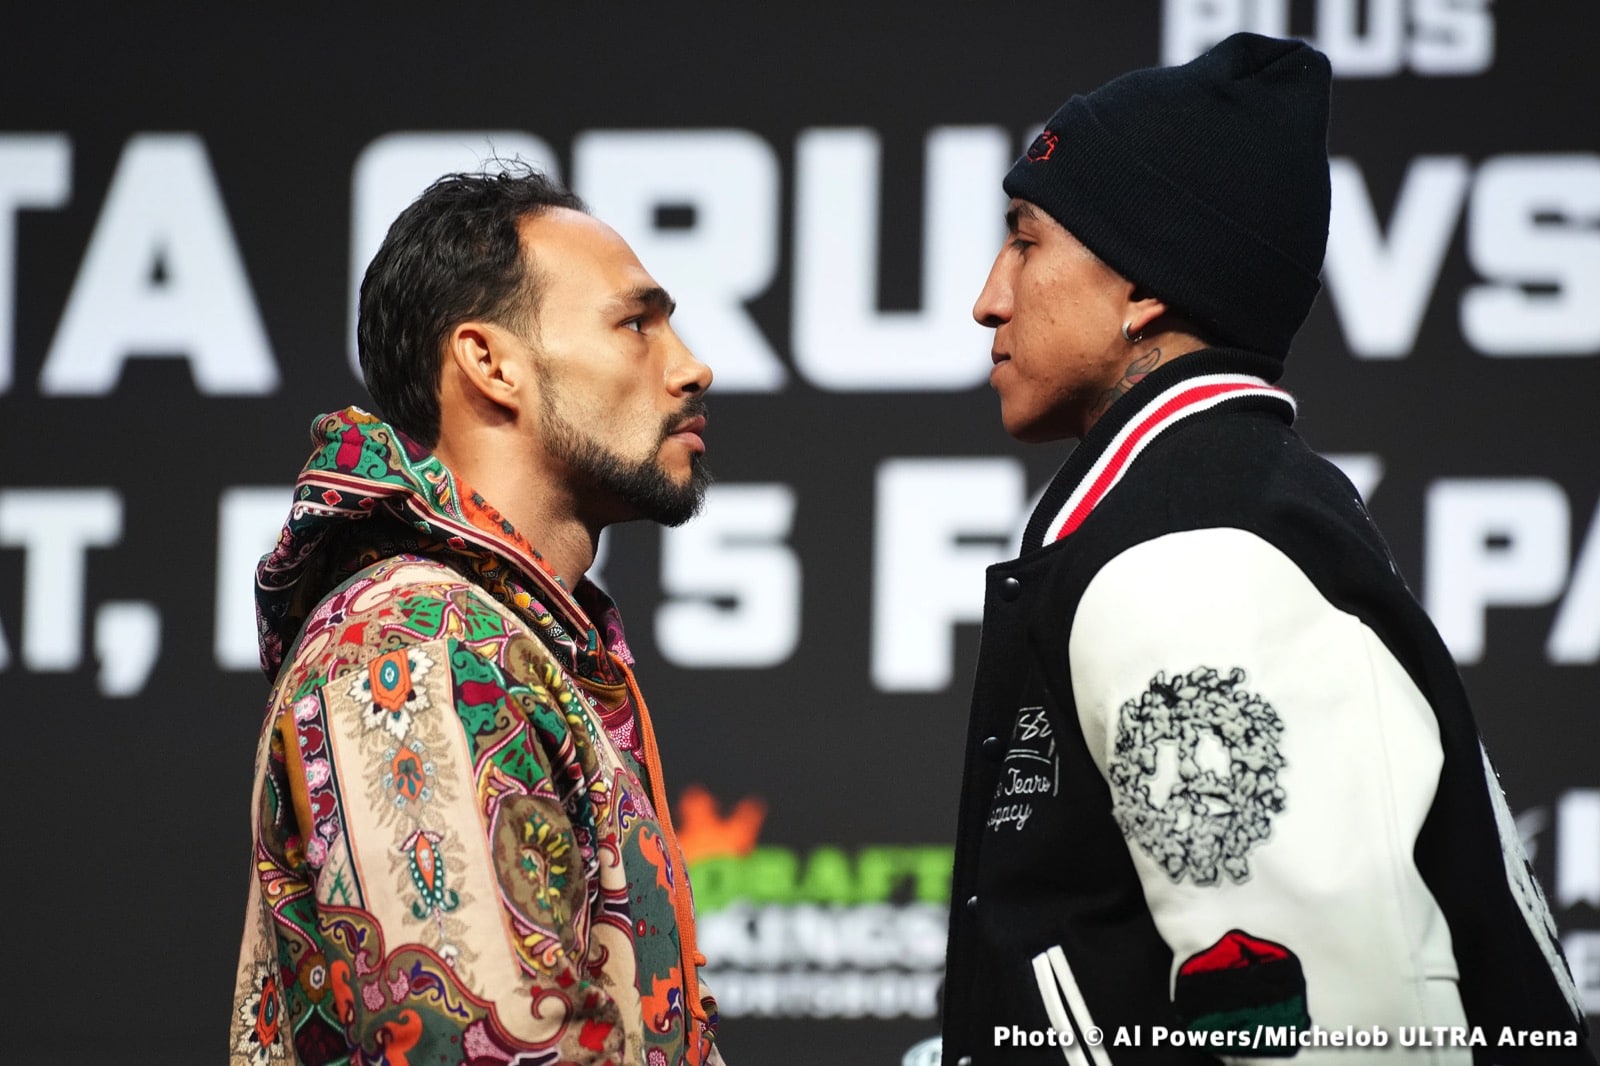 Errol Spence Jr., Keith Thurman, boxing photo by Yordenis Ogas and news photo